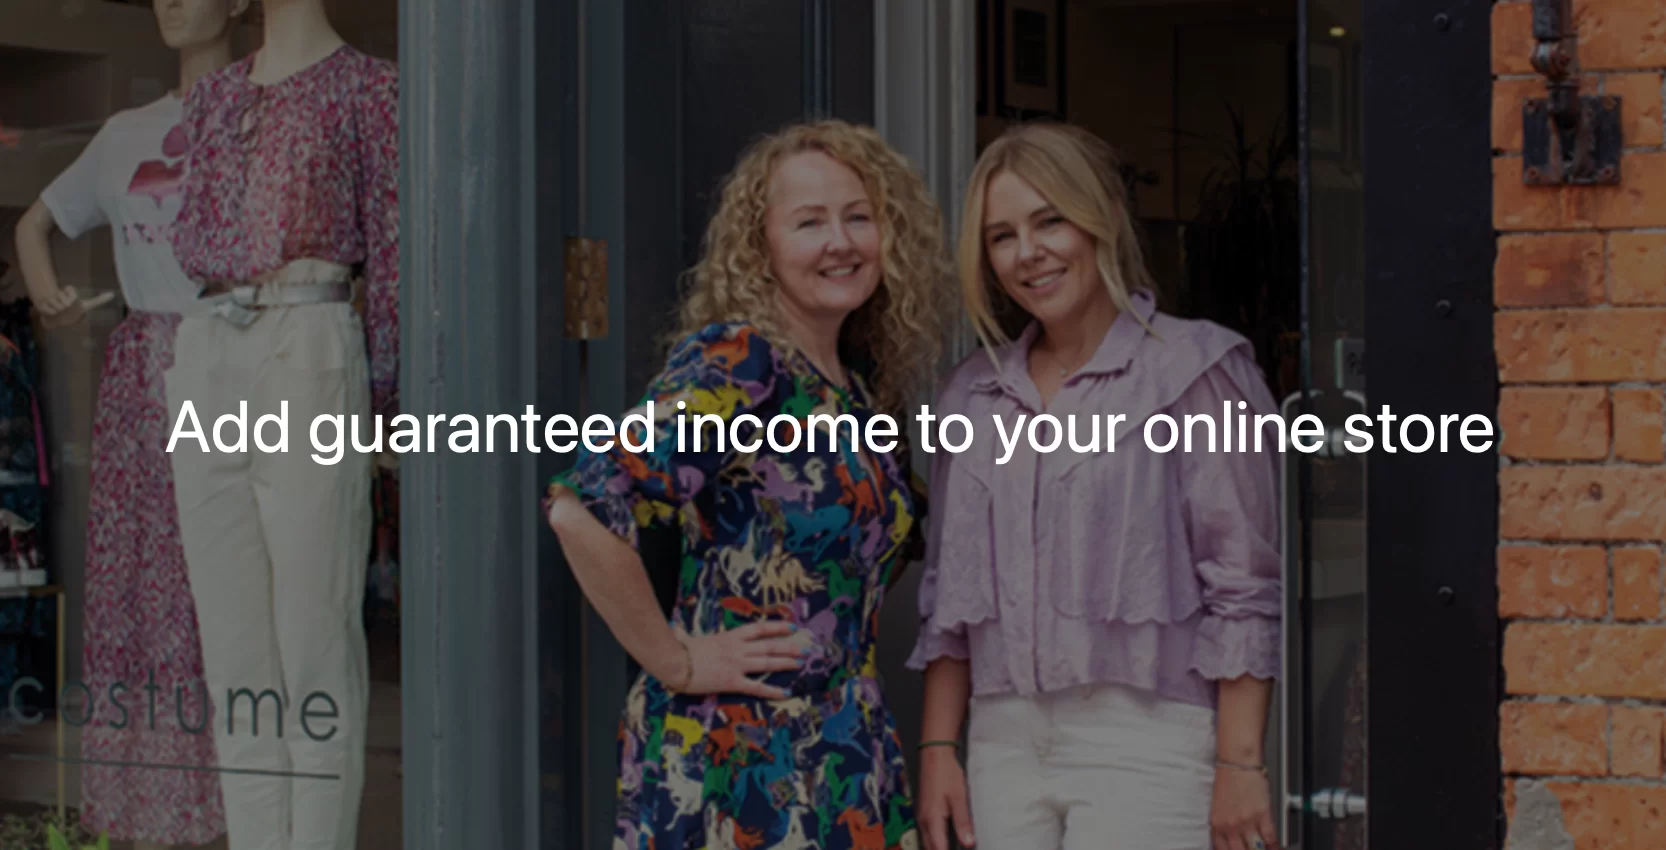 Personalisation software trial now includes guaranteed returns